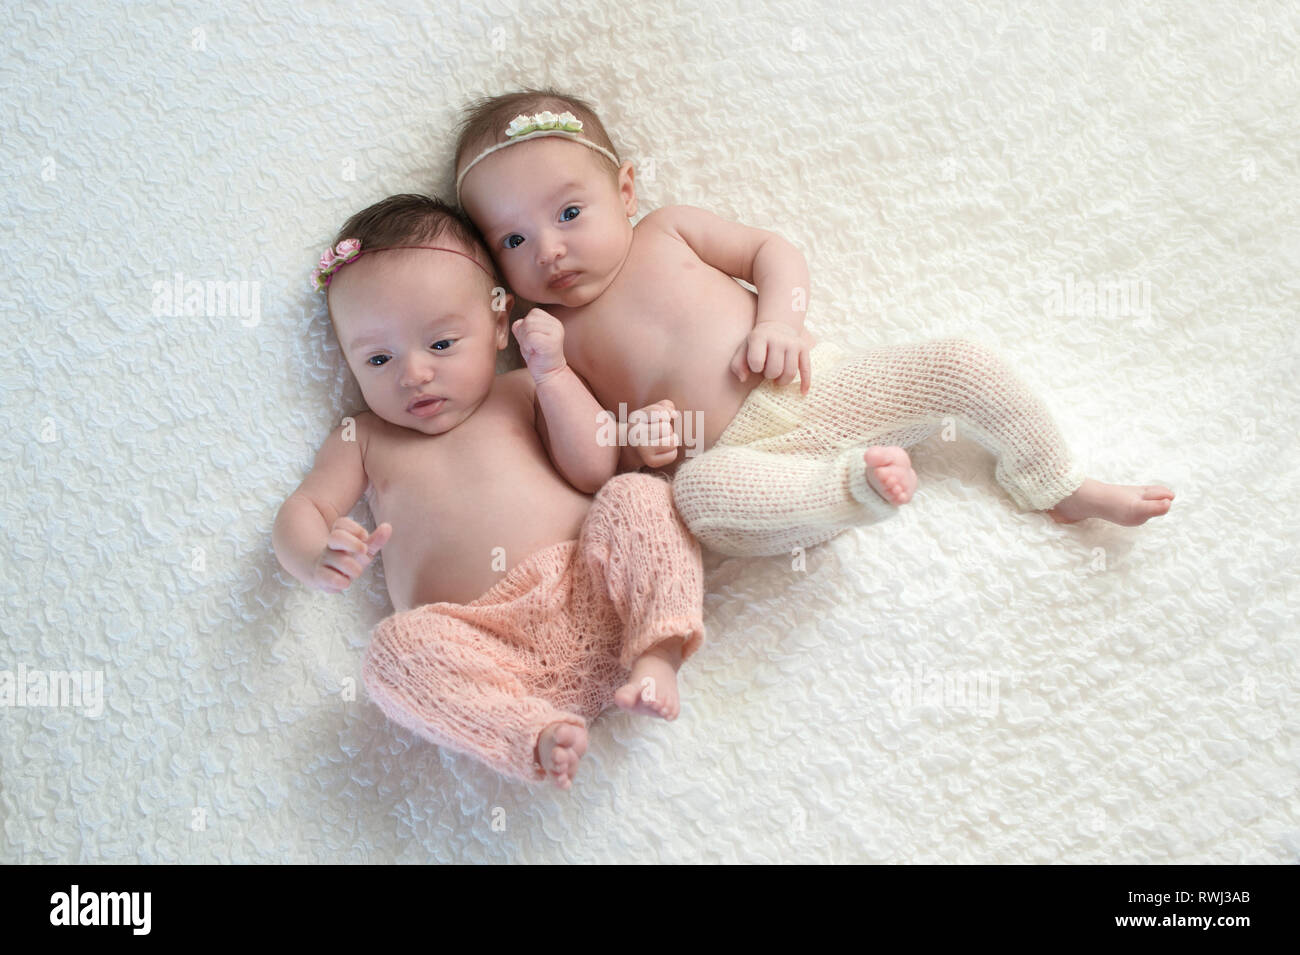 Baby fraternal twin sisters wearing light pink and cream knitted pants. Stock Photo